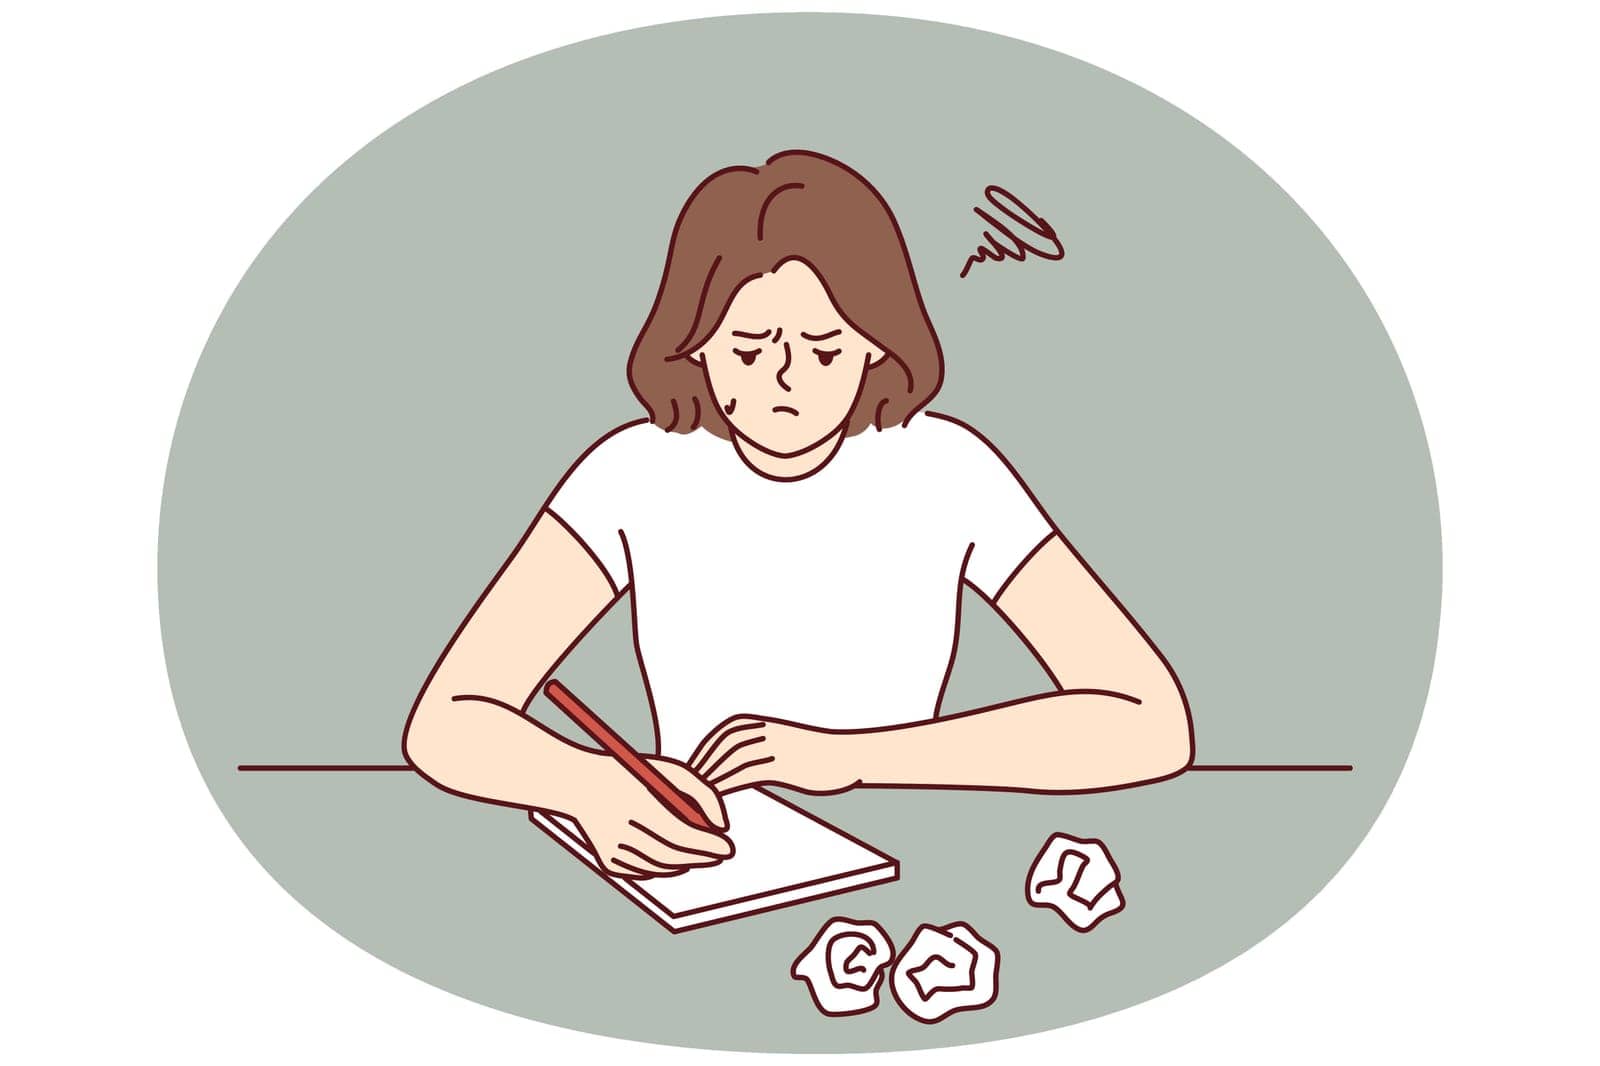 Stressed girl sitting at table with crumpled papers writes essay for university admission. Depressed woman writer composing novel lacks inspiration and ideas for fiction story. Flat vector image